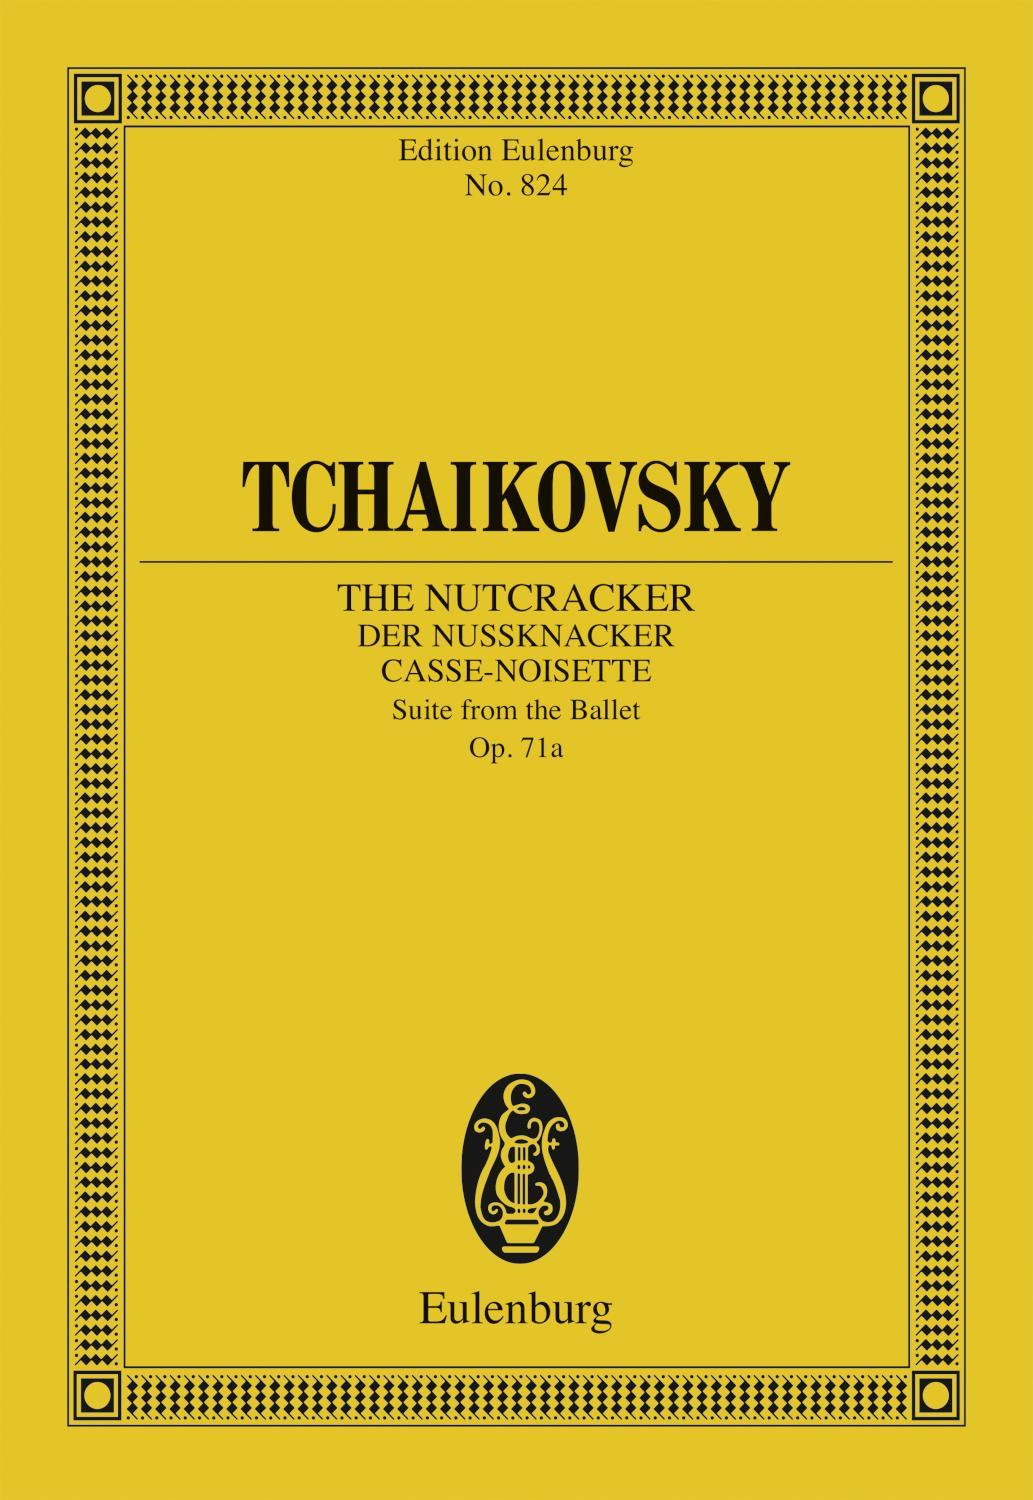 The Nutcracker Suite from the Ballet, Op. 71a